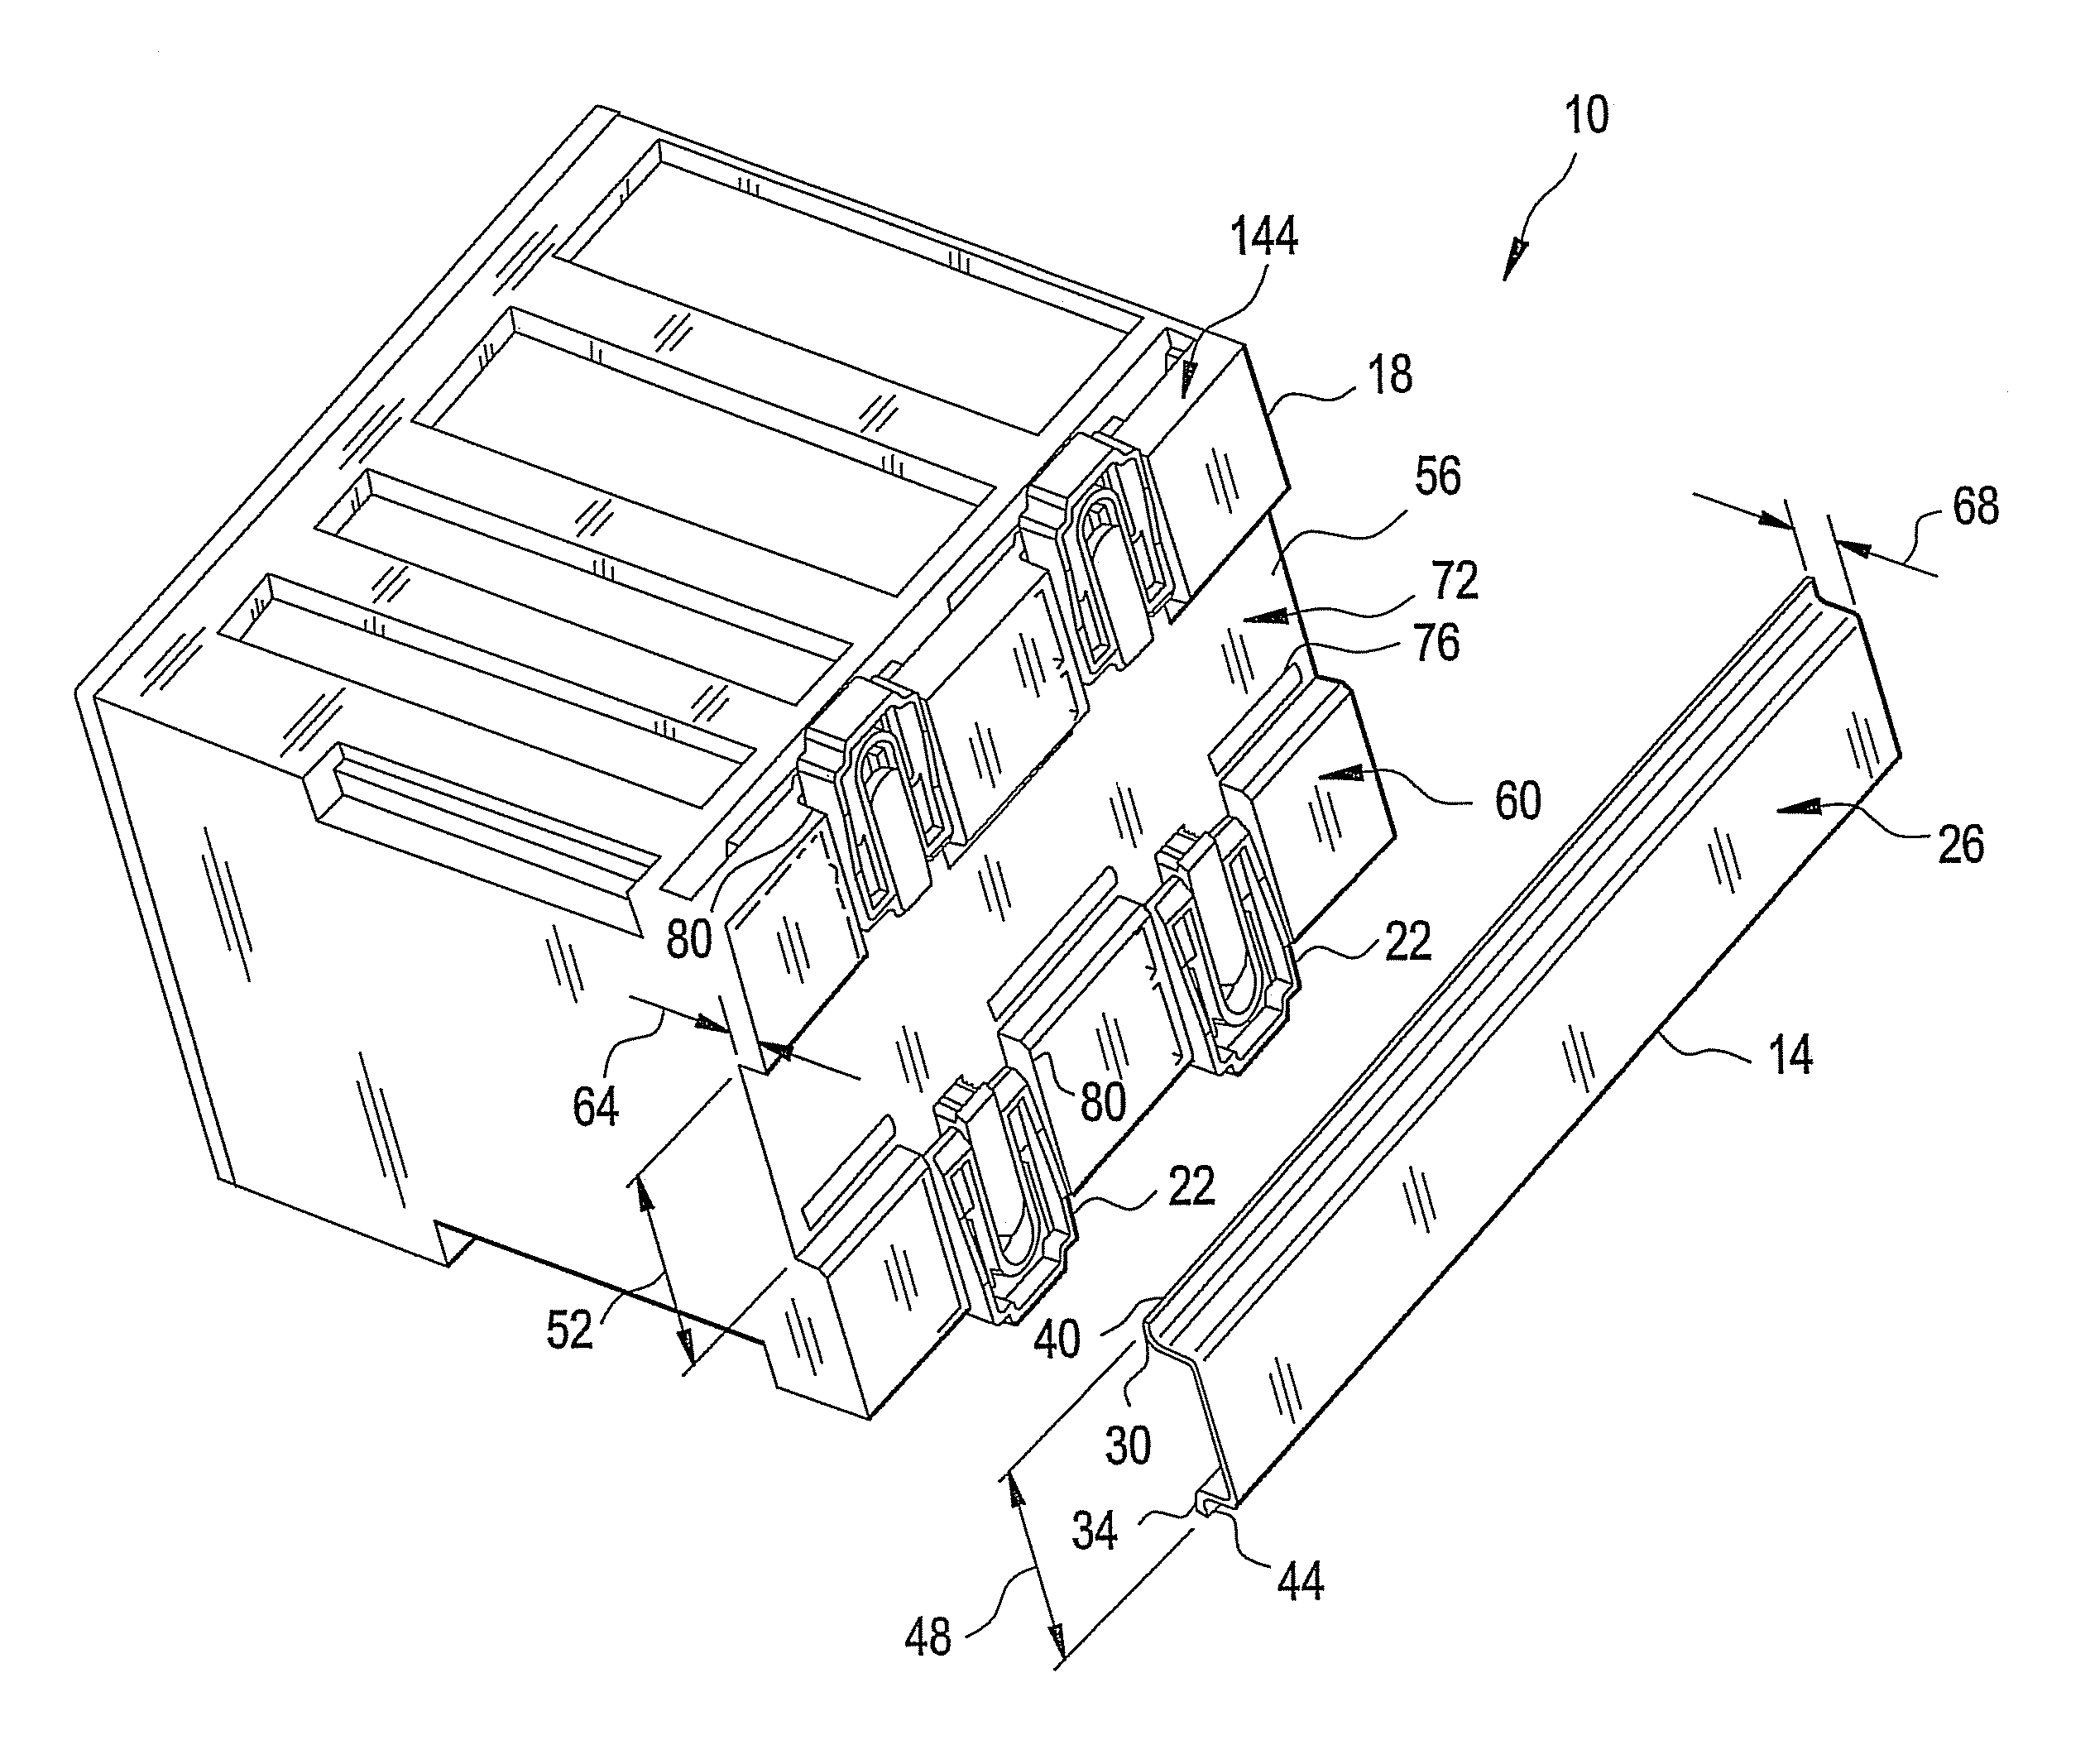 Enclosure-to-rail retaining system and method